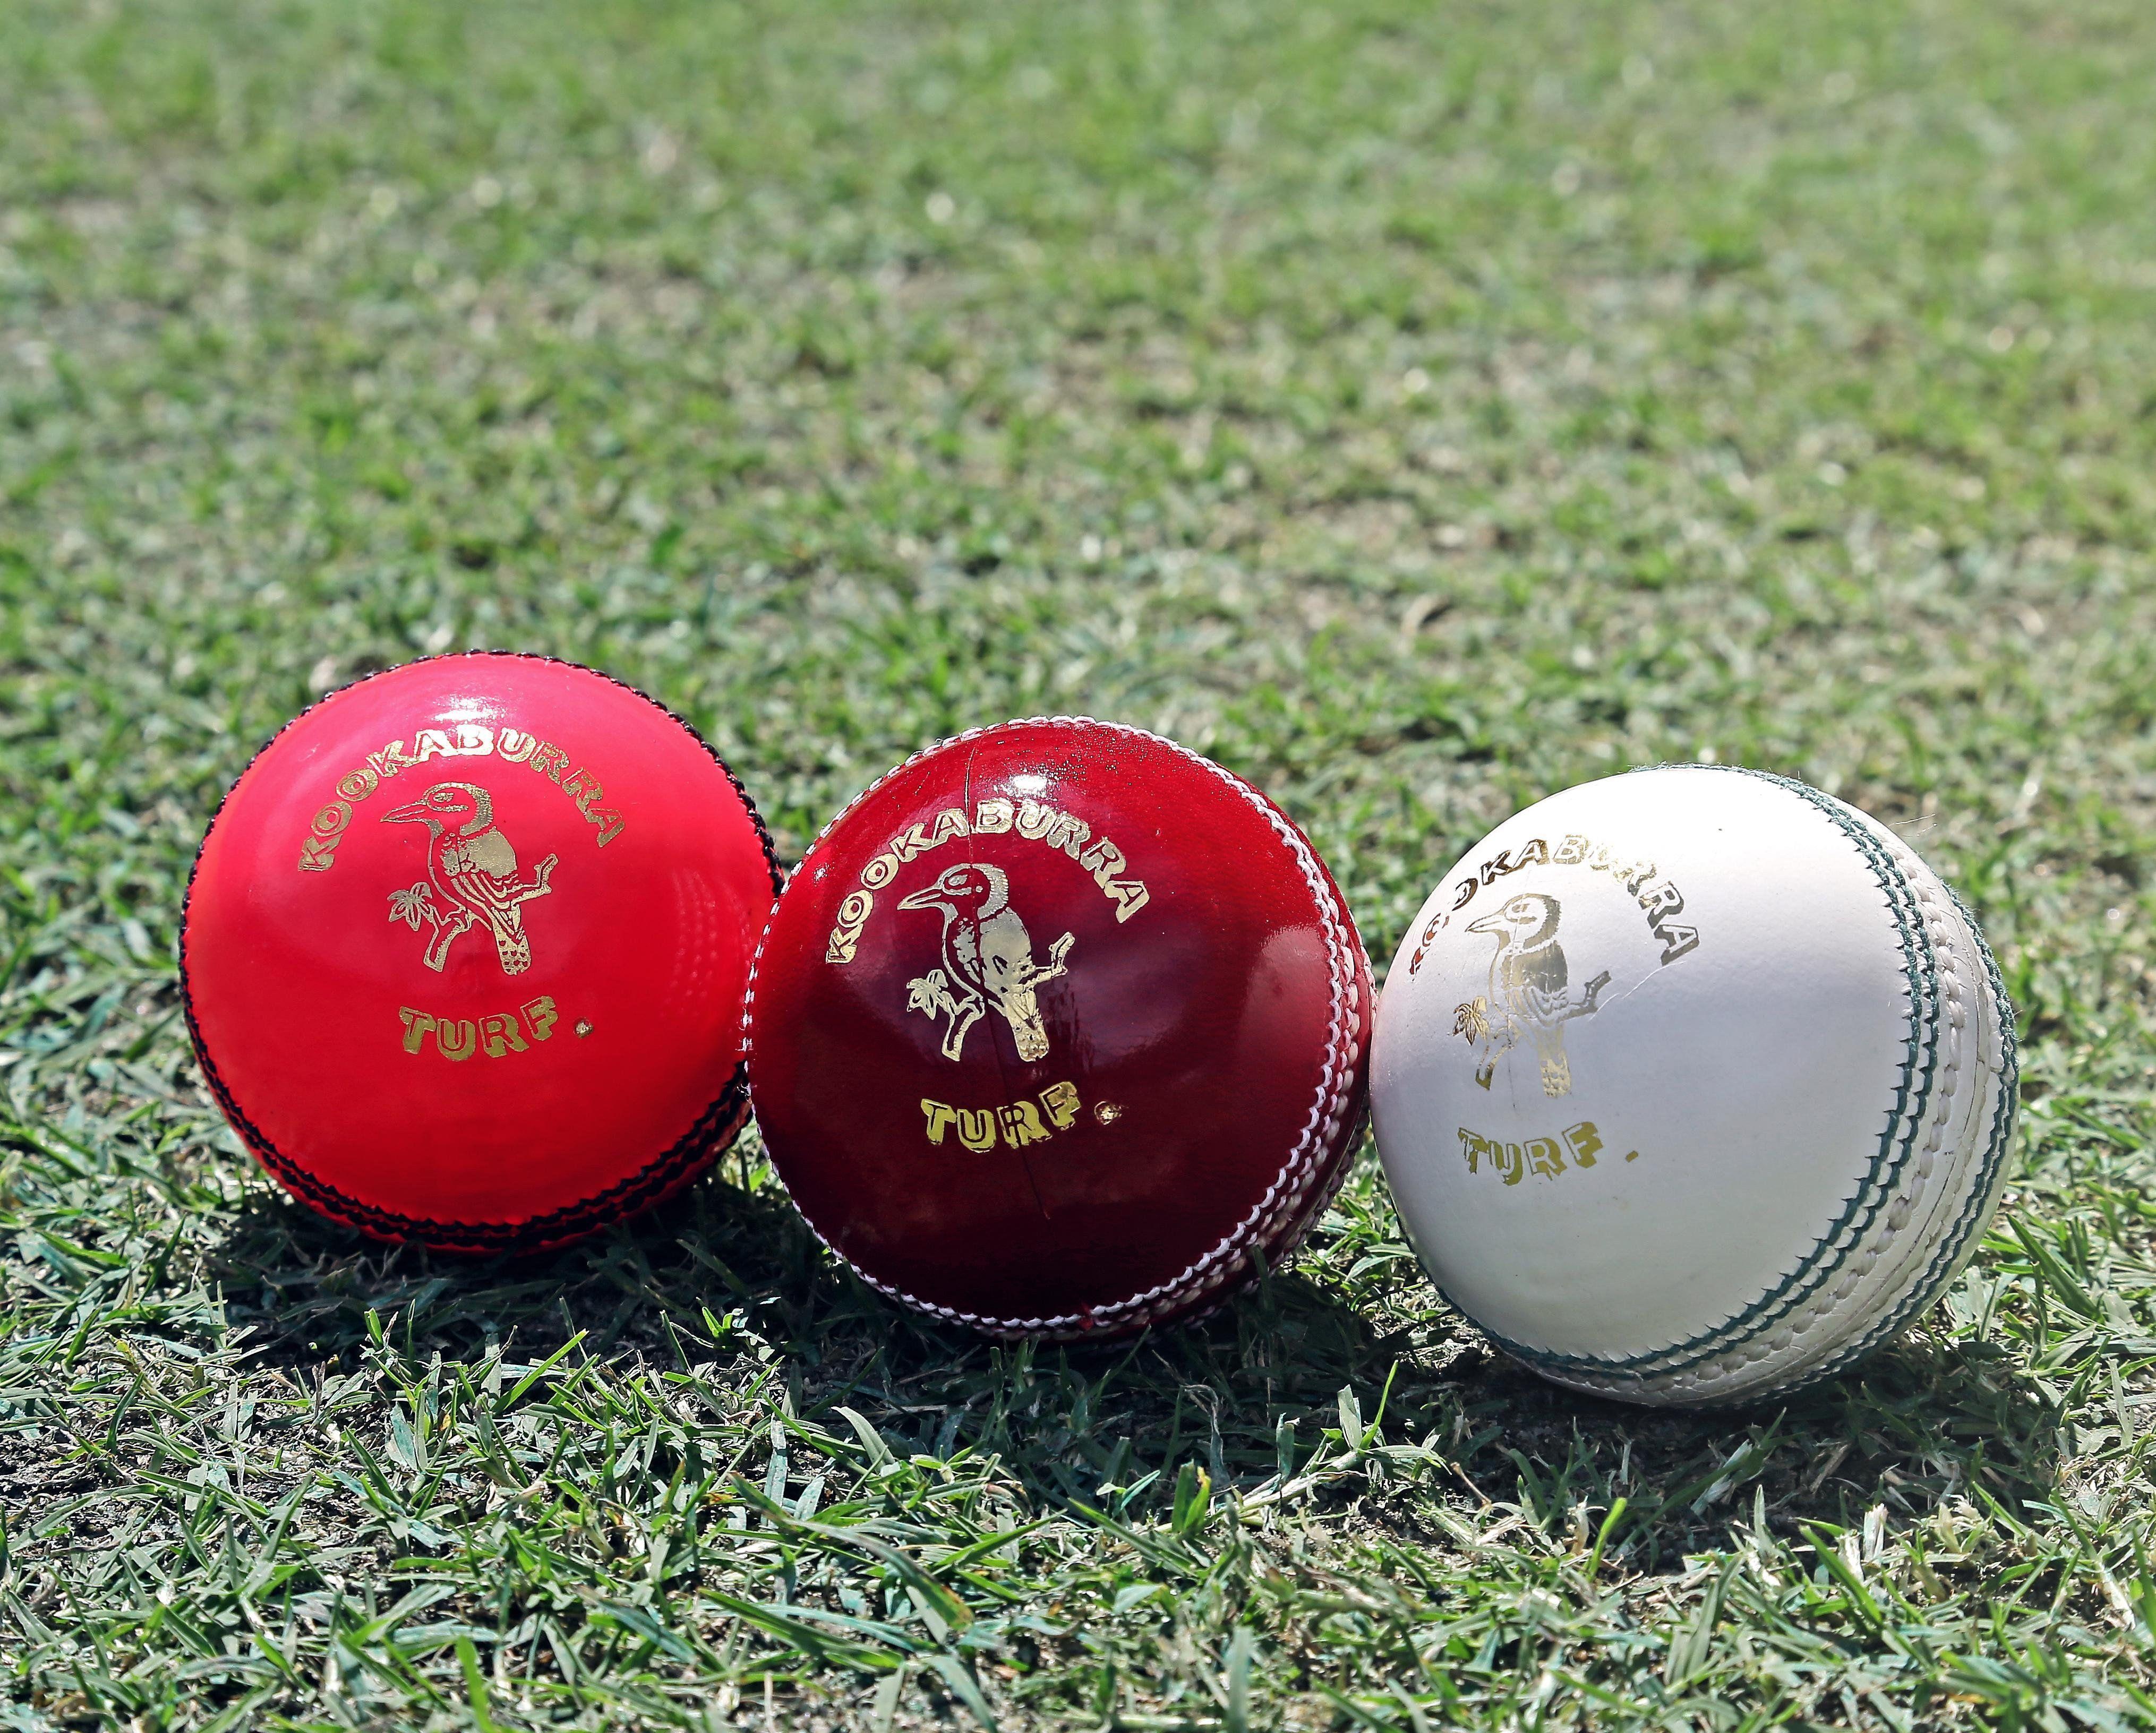 Red and White Ball Logo - How it is made: The pink Kookaburra cricket ball